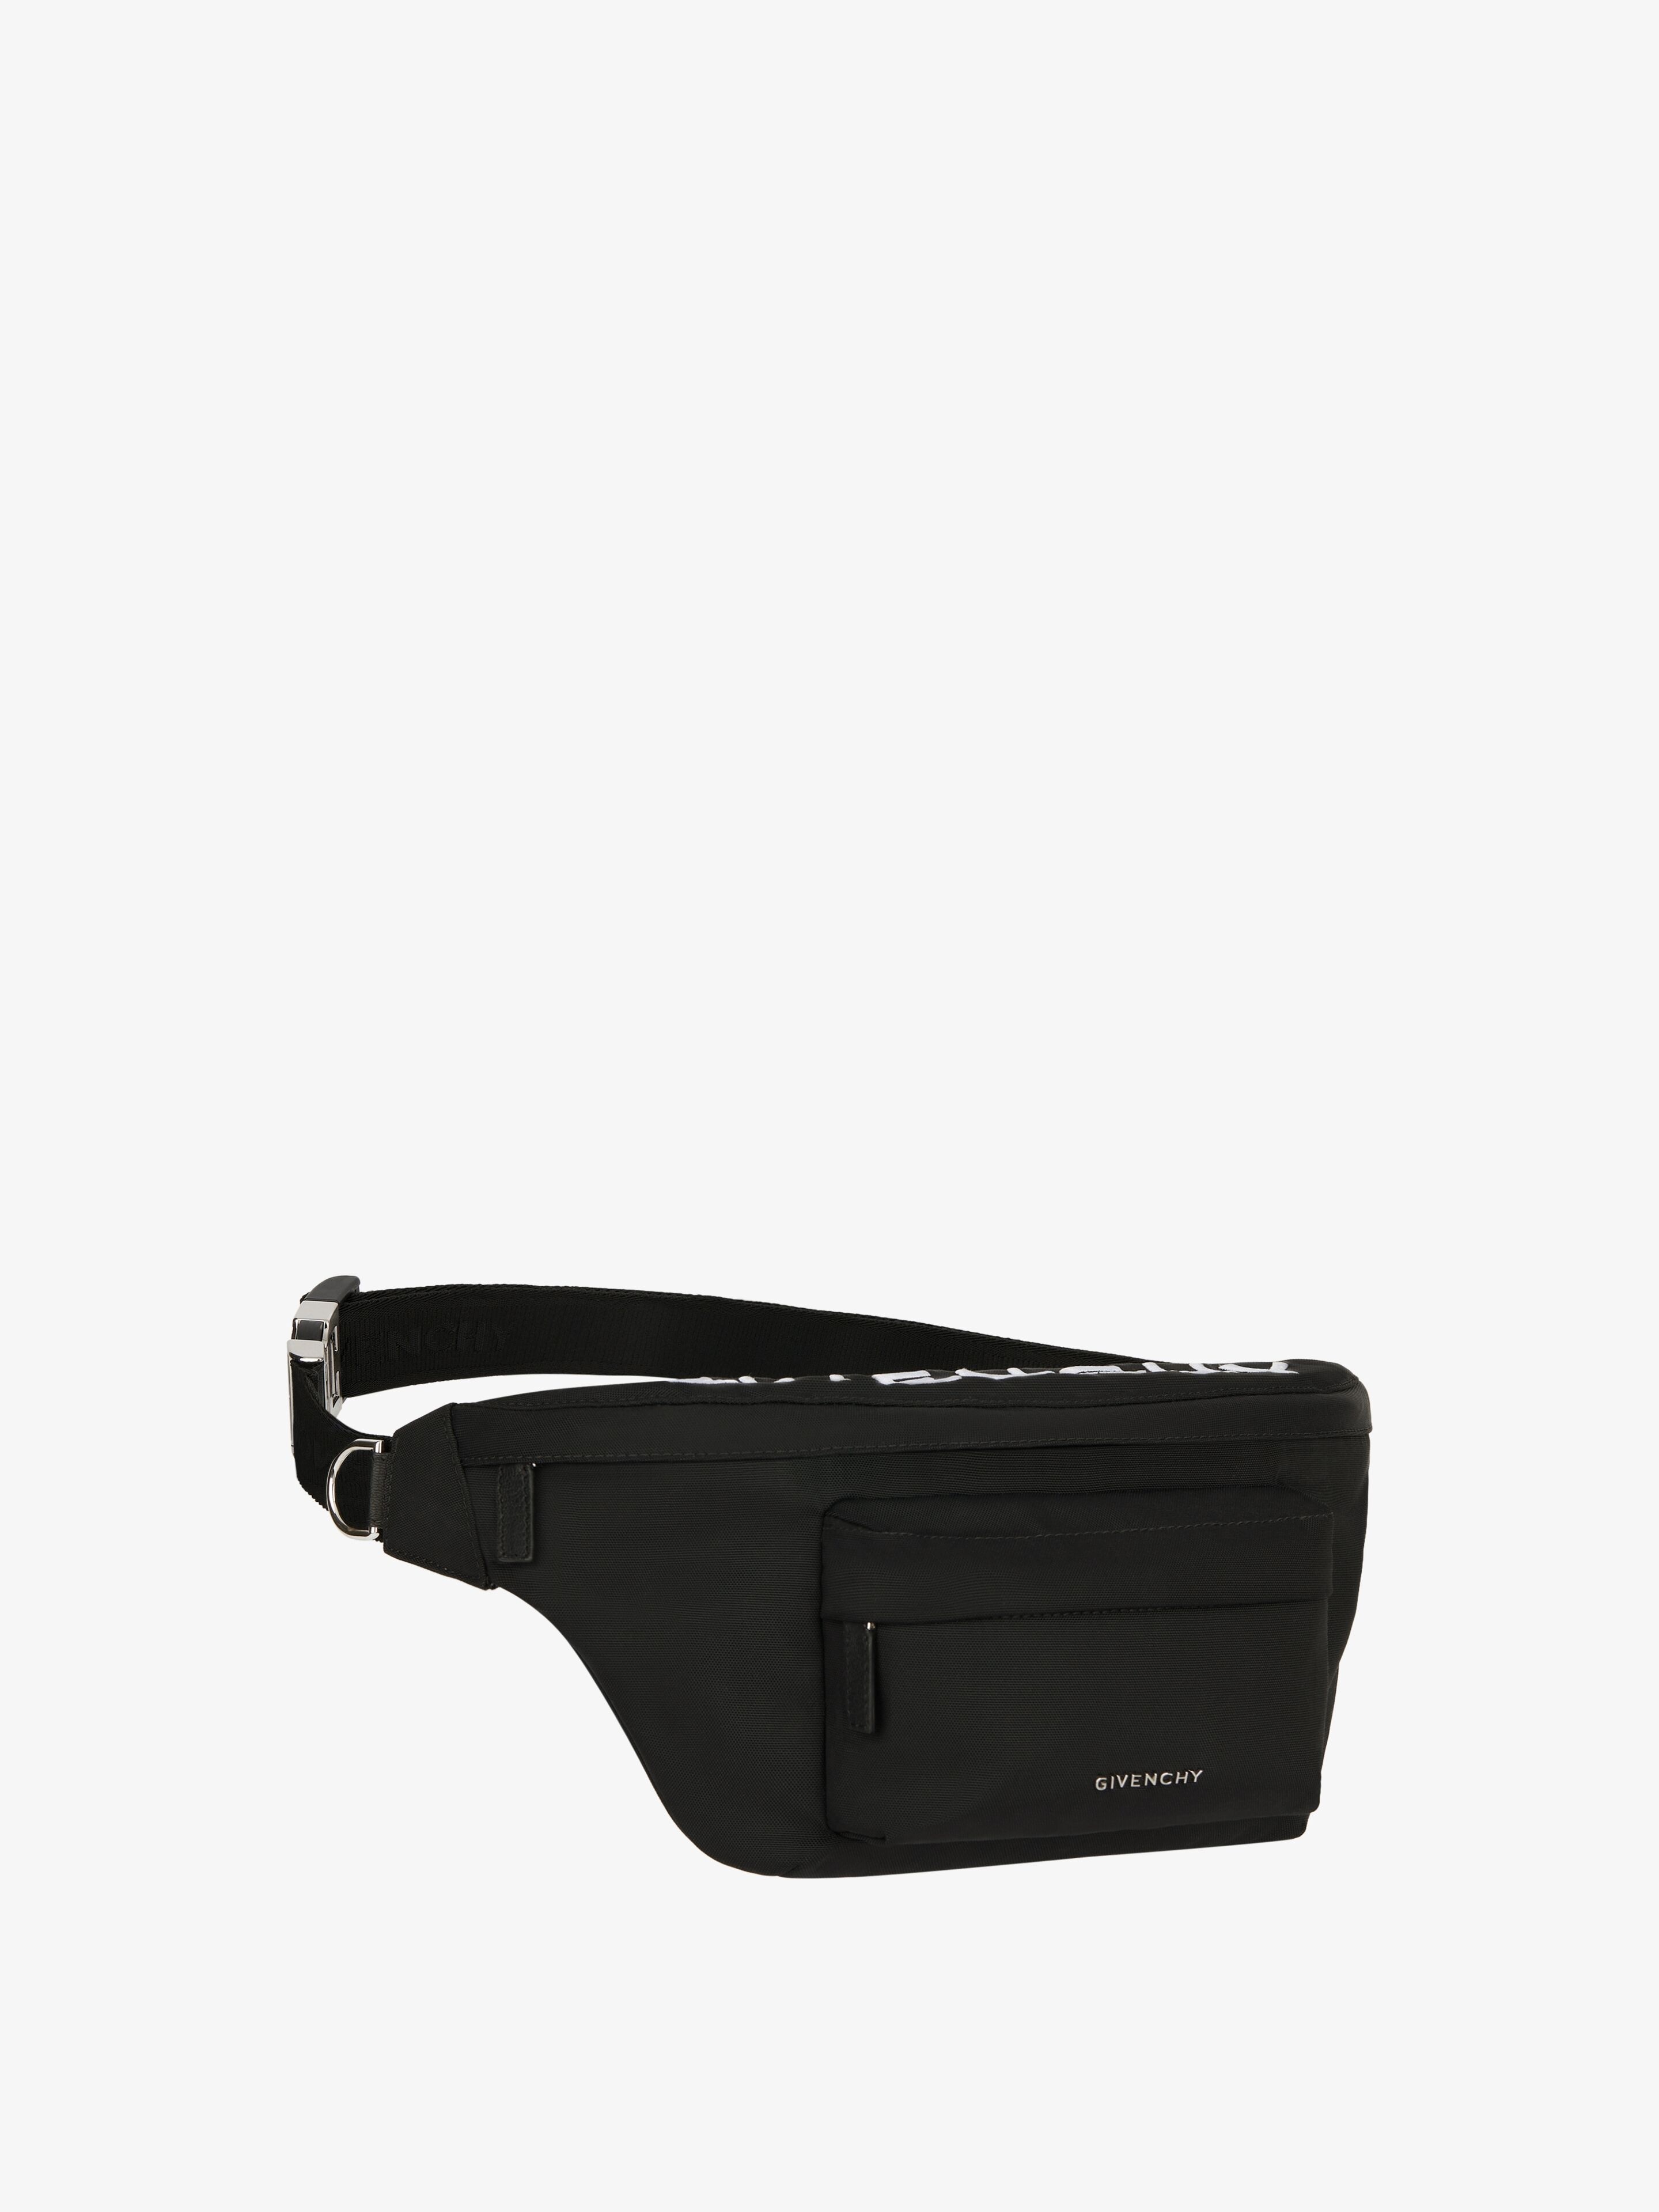 ESSENTIAL U BUMBAG IN NYLON WITH GIVENCHY EMBROIDERY - 3